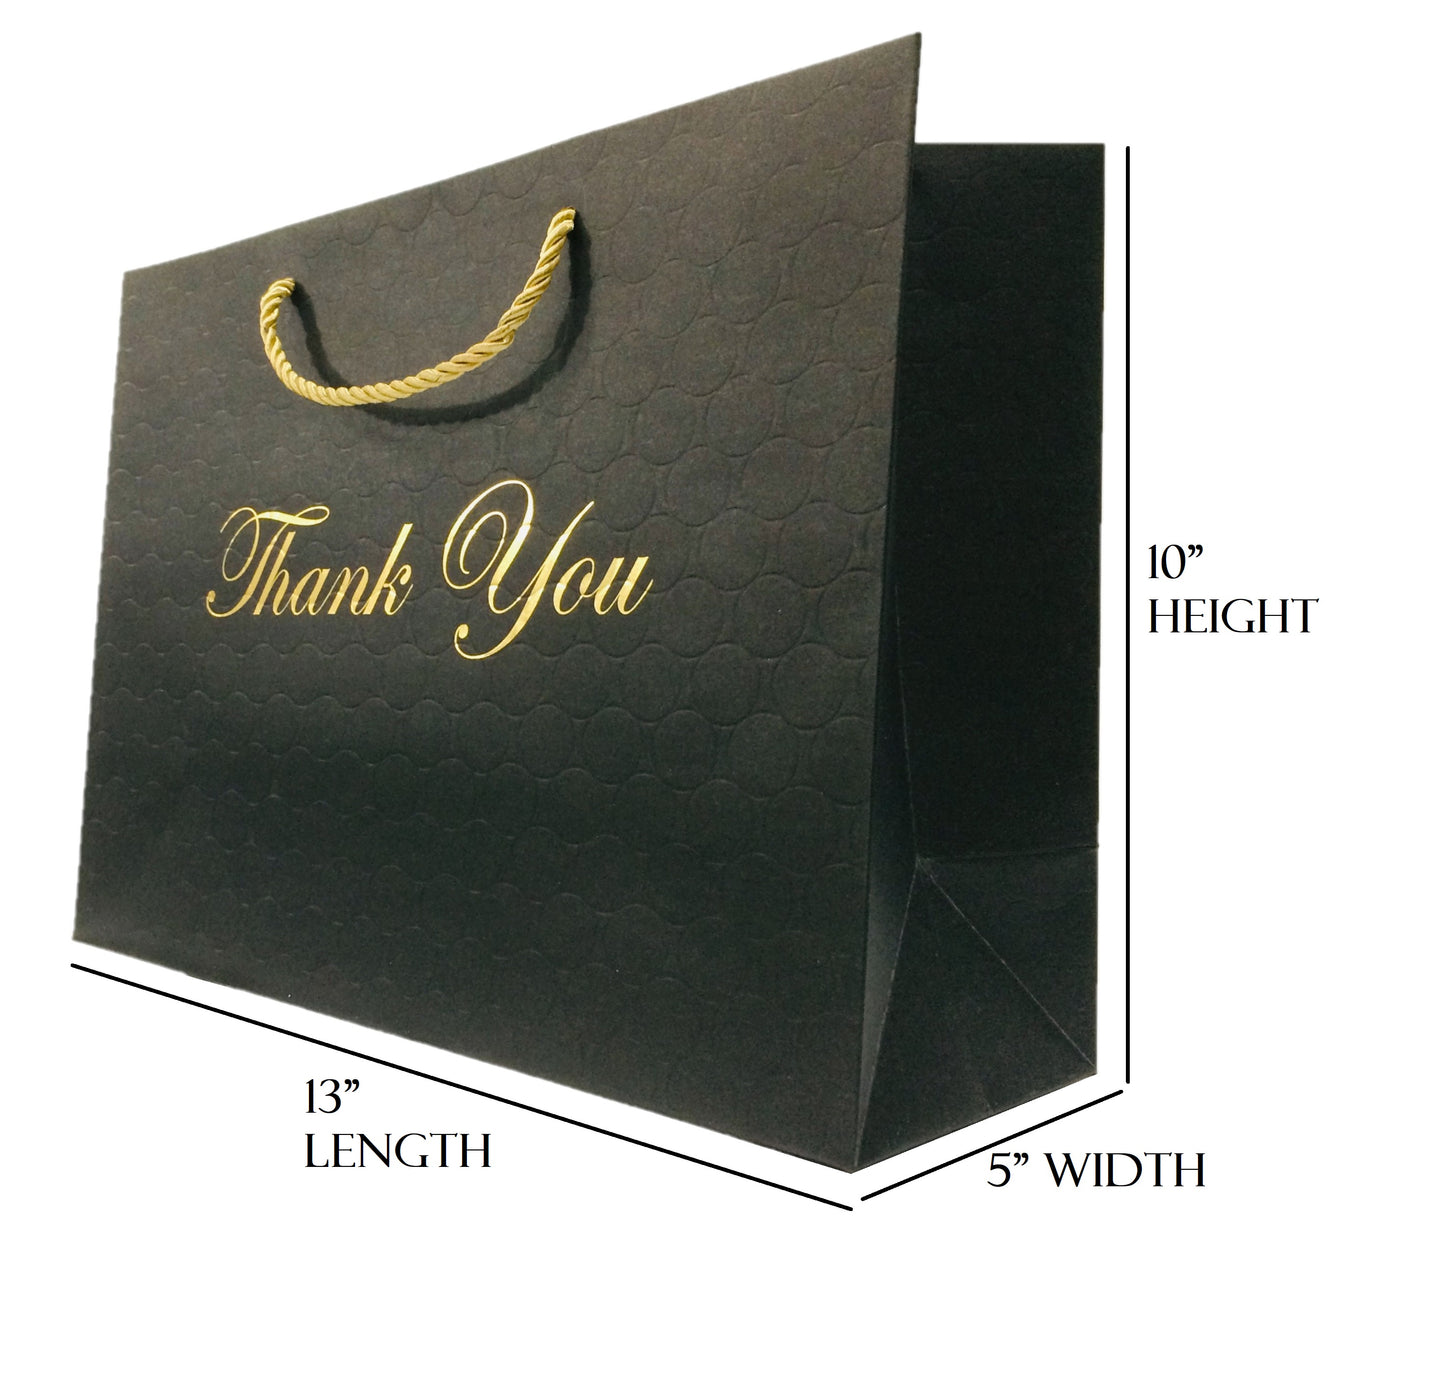 12 Gift Bags Large Thank You Paper Shopping Bags with handles 13x5x10 Large Gift Bags Heavy Duty Premium Quality Matte Embossed for Merchandise, Baby Shower Bags store business